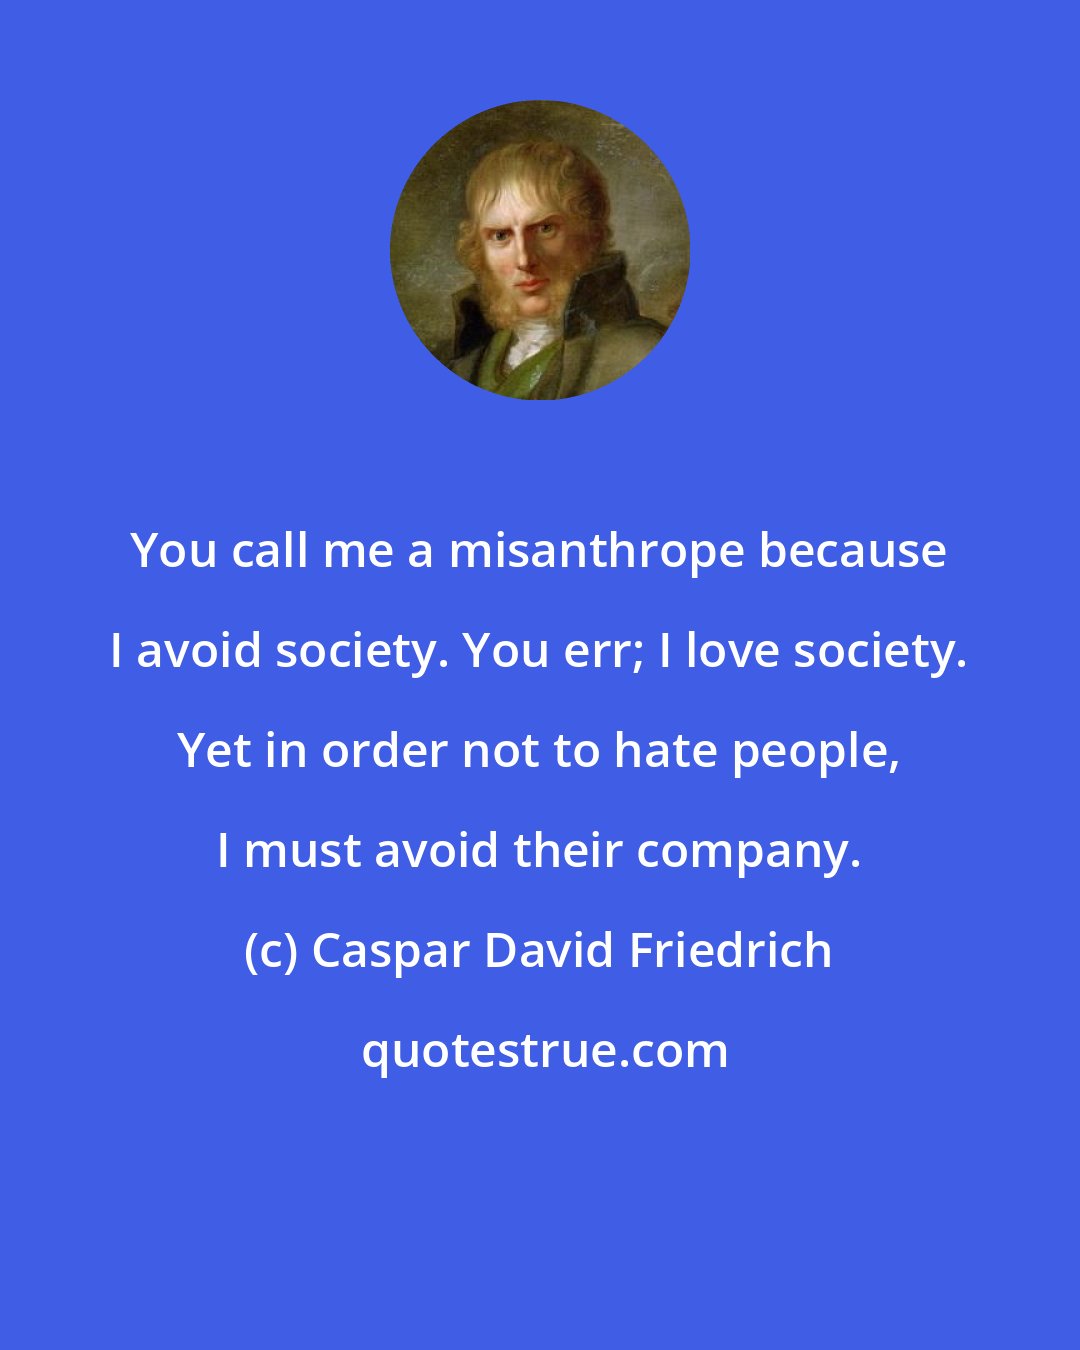 Caspar David Friedrich: You call me a misanthrope because I avoid society. You err; I love society. Yet in order not to hate people, I must avoid their company.